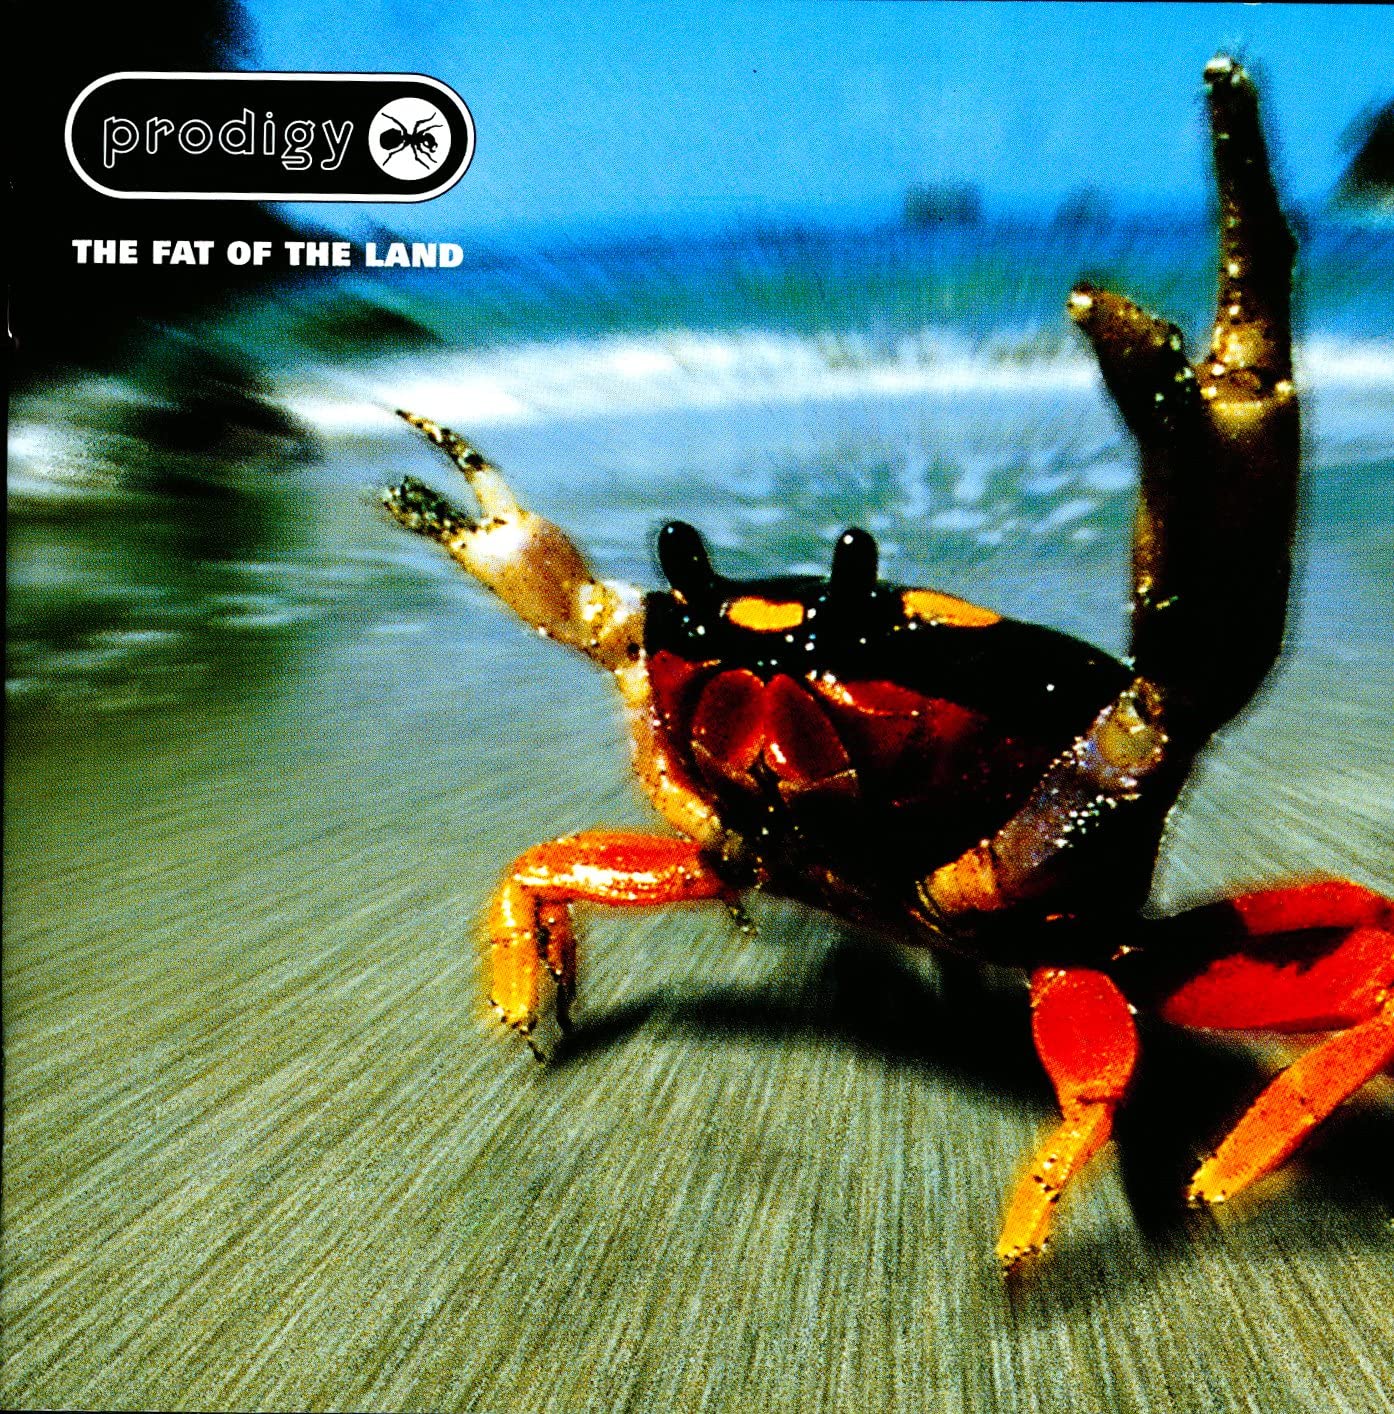 All Time Classic Album on Vinyl From The Prodigy. Massive, Huge, Large, a Hit - How Many More Ways Do You Want Us To Say It?. Get Yourself a Copy Now.